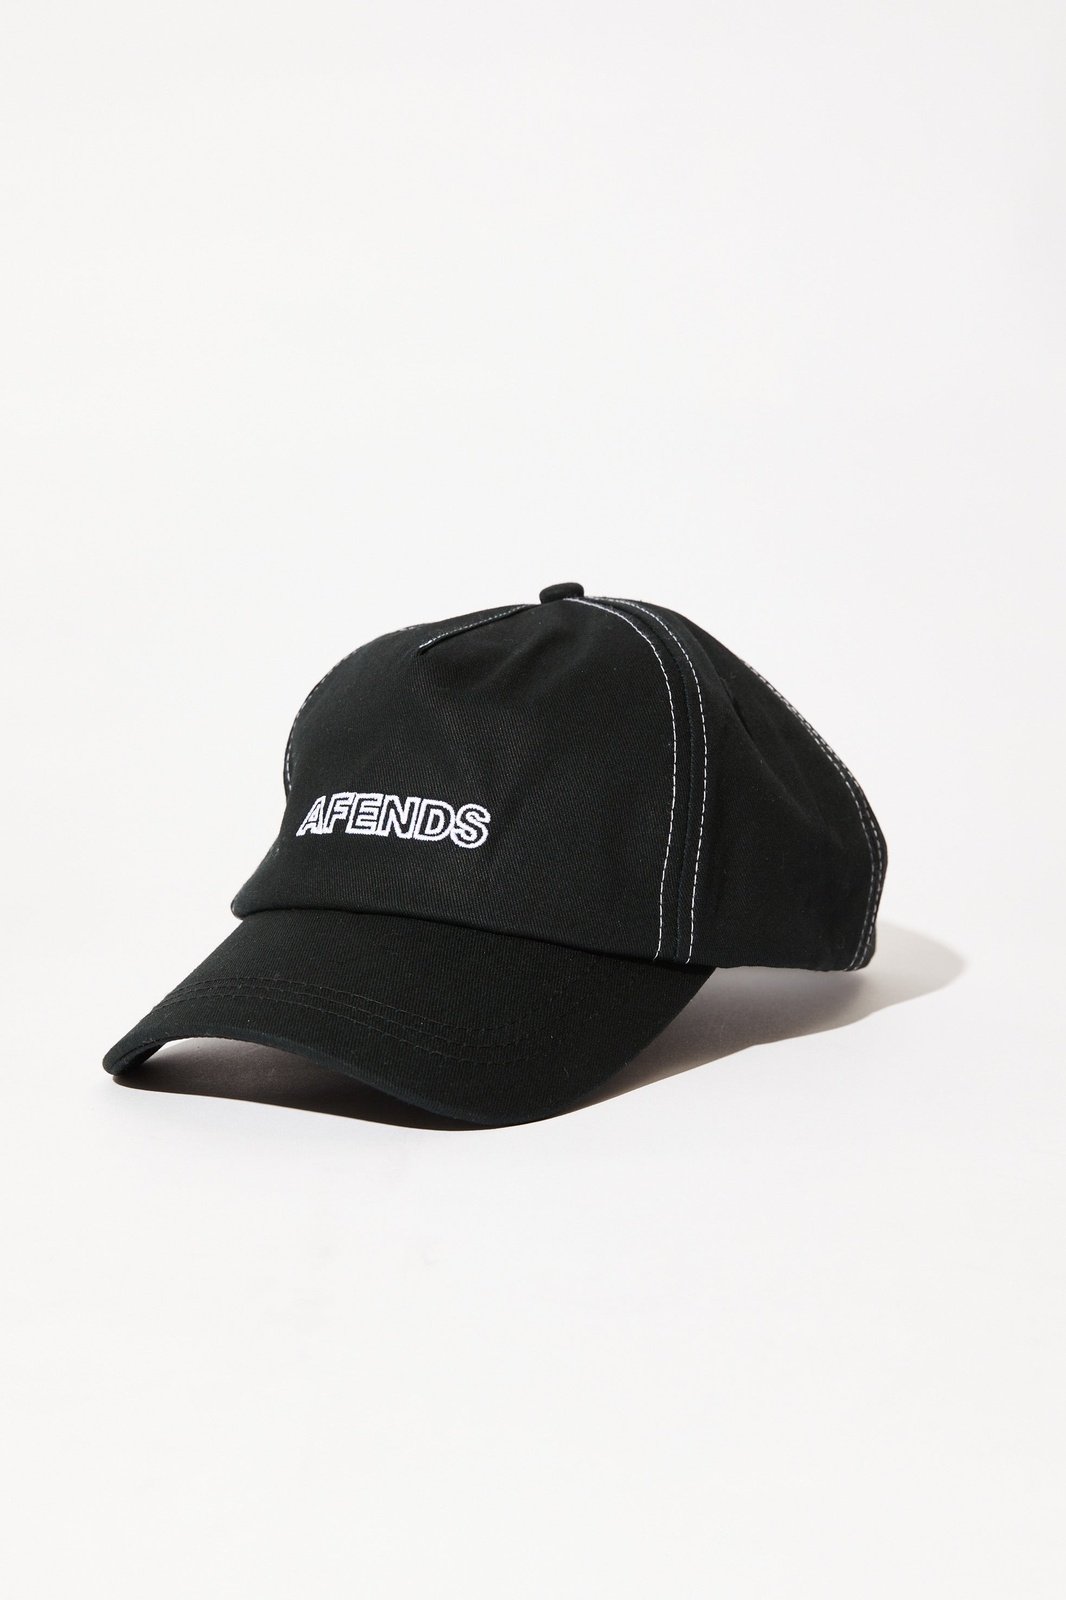 AFENDS Outline recycled trucker cap - Black